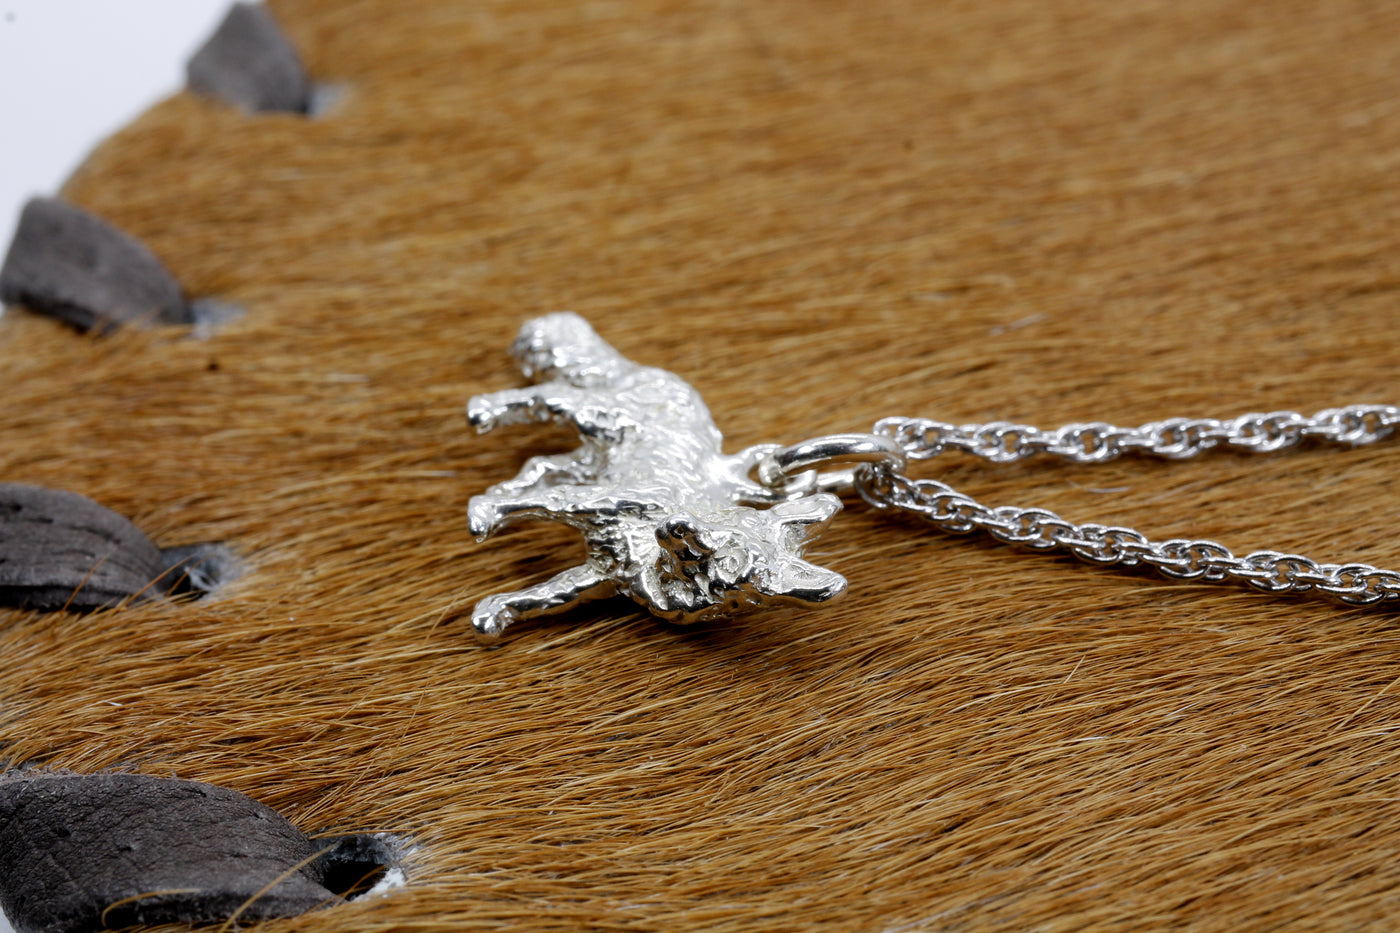 Fox Necklaces For Women Fox Gifts 925 Sterling Silver Red Fox Pendant  Necklace